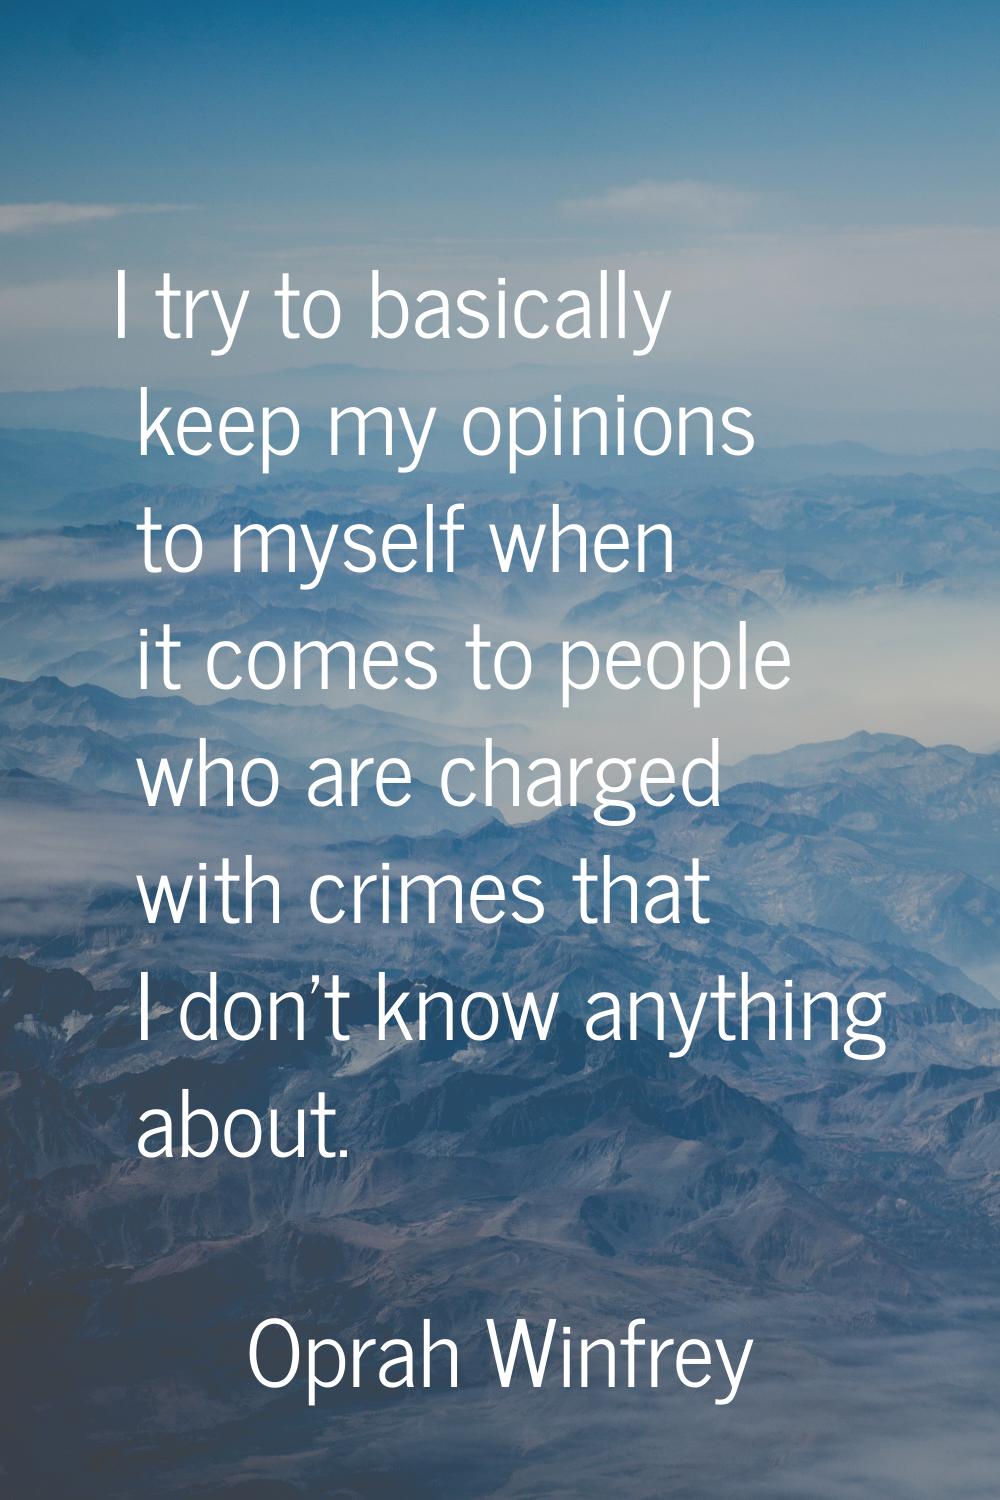 I try to basically keep my opinions to myself when it comes to people who are charged with crimes t